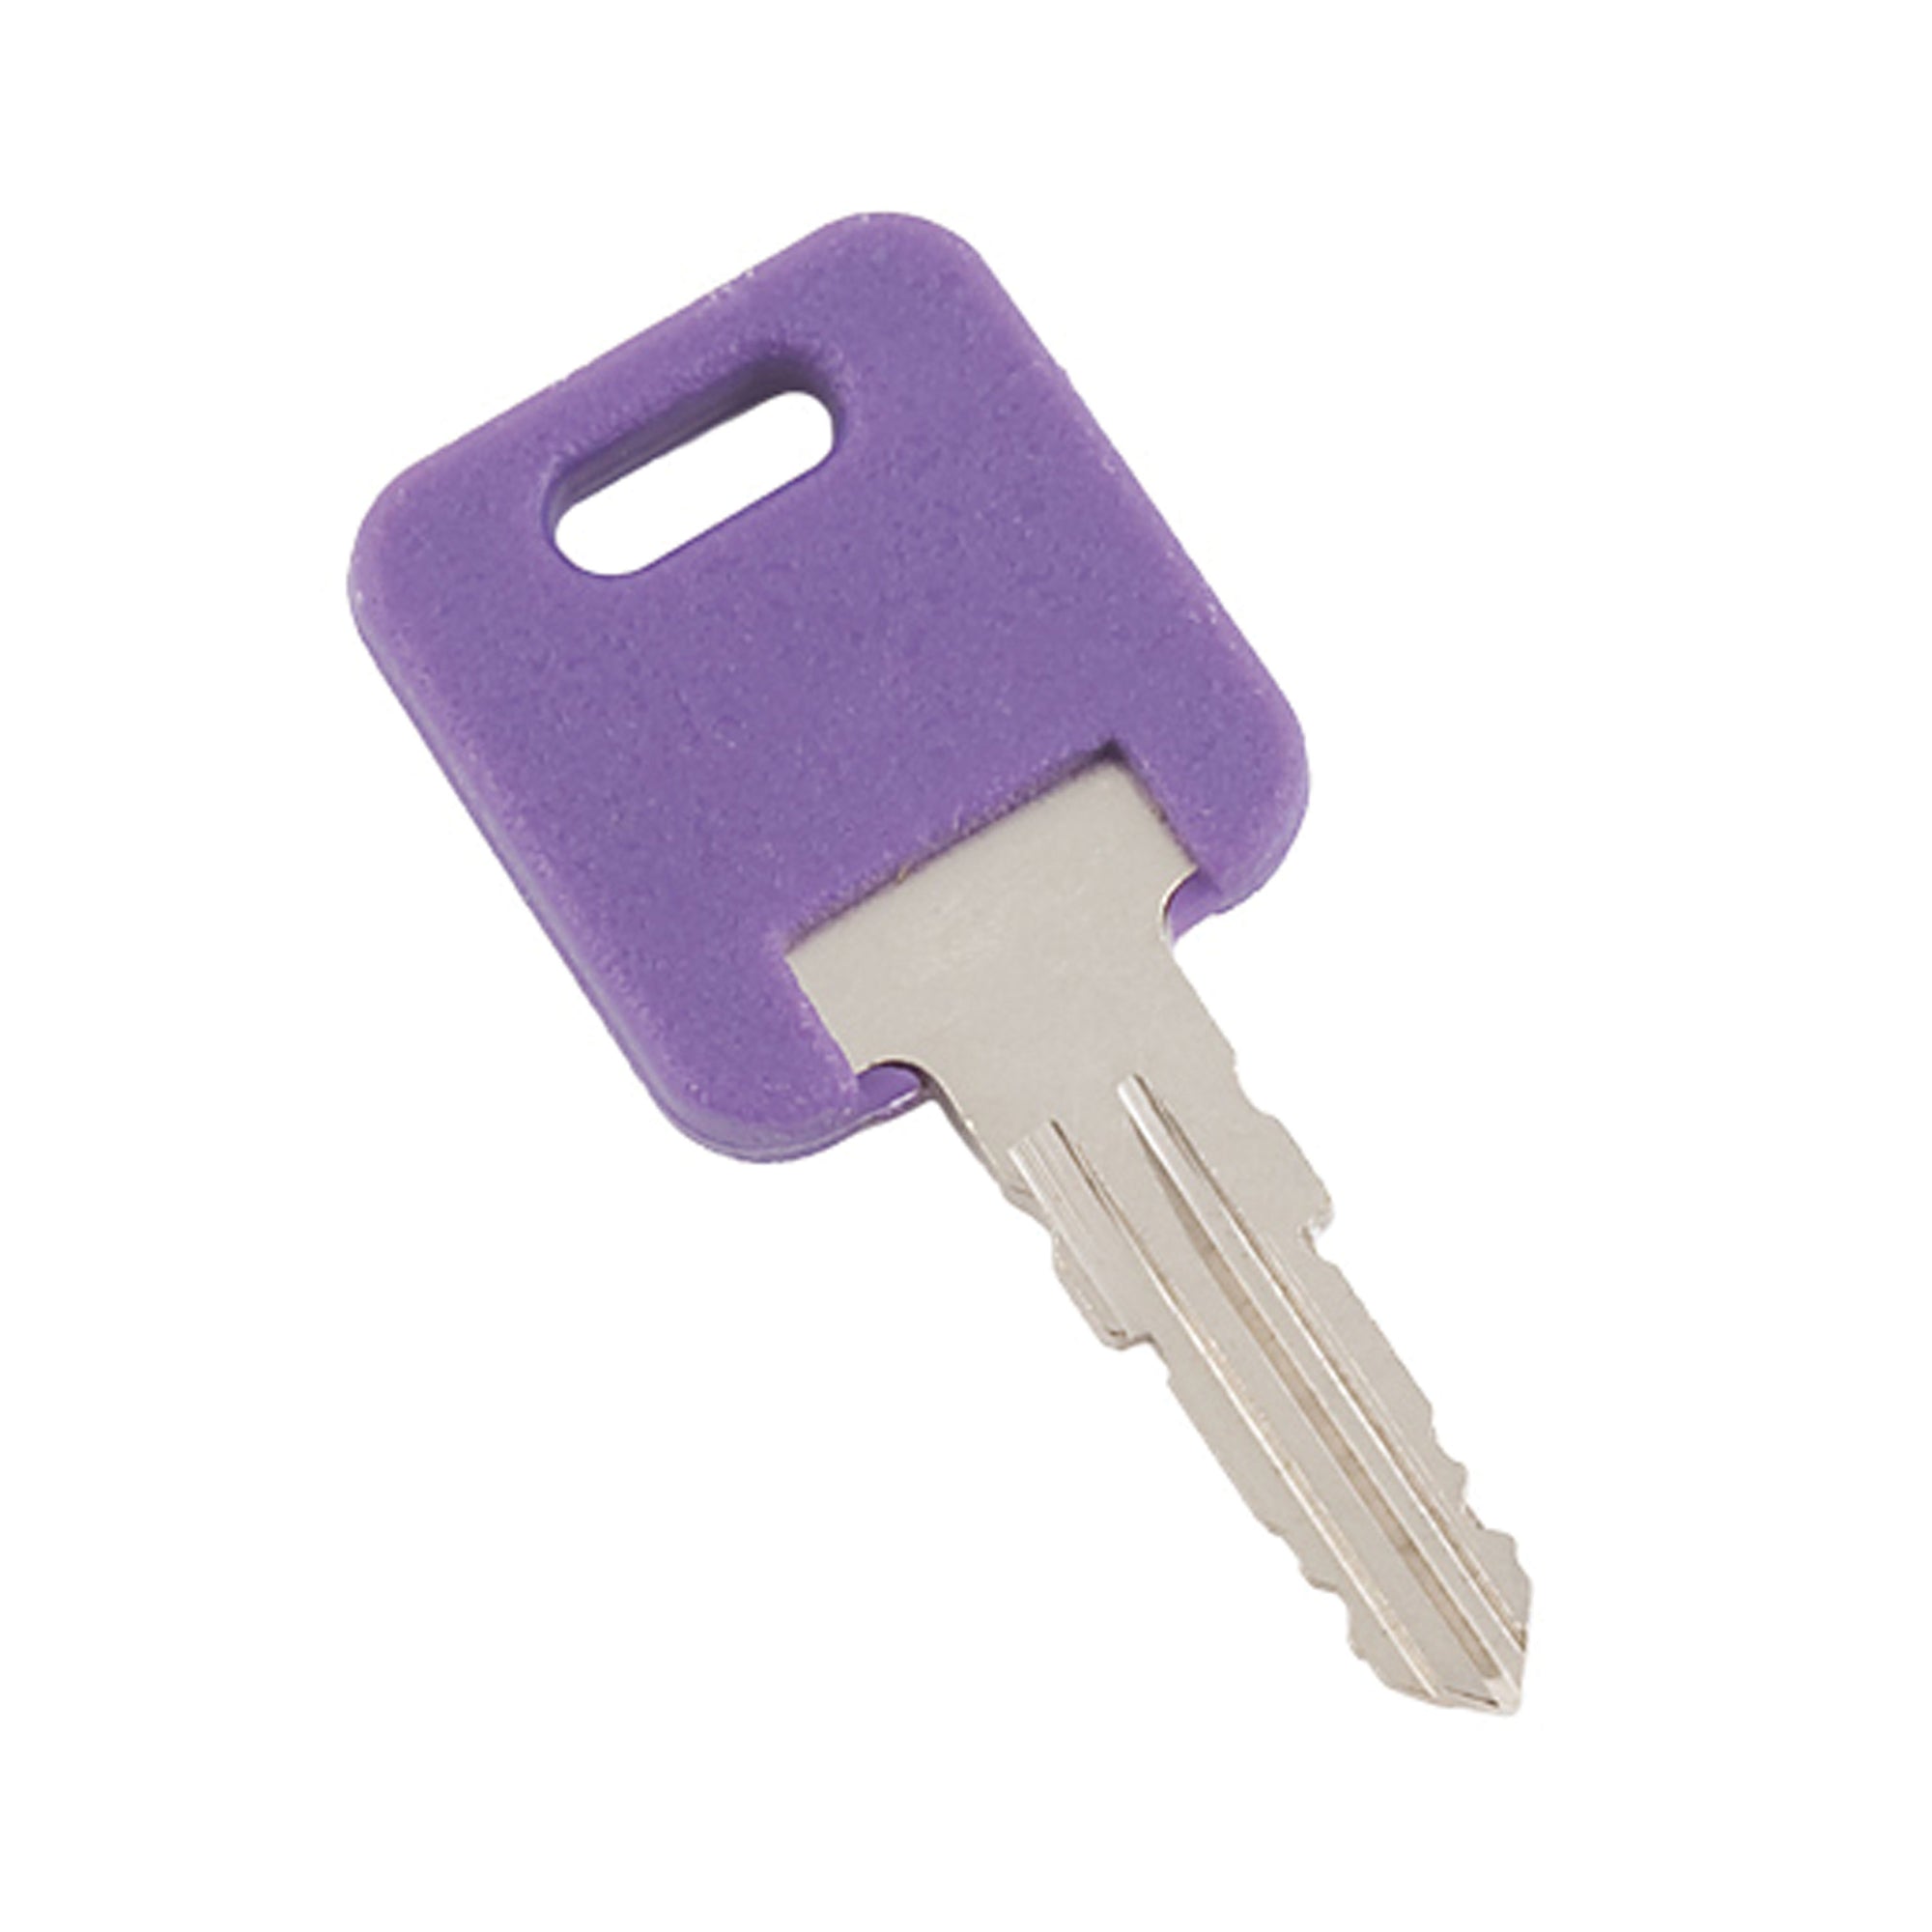 Creative Products Group G-338 Global Link G-Series Replacement Key - #338, Each